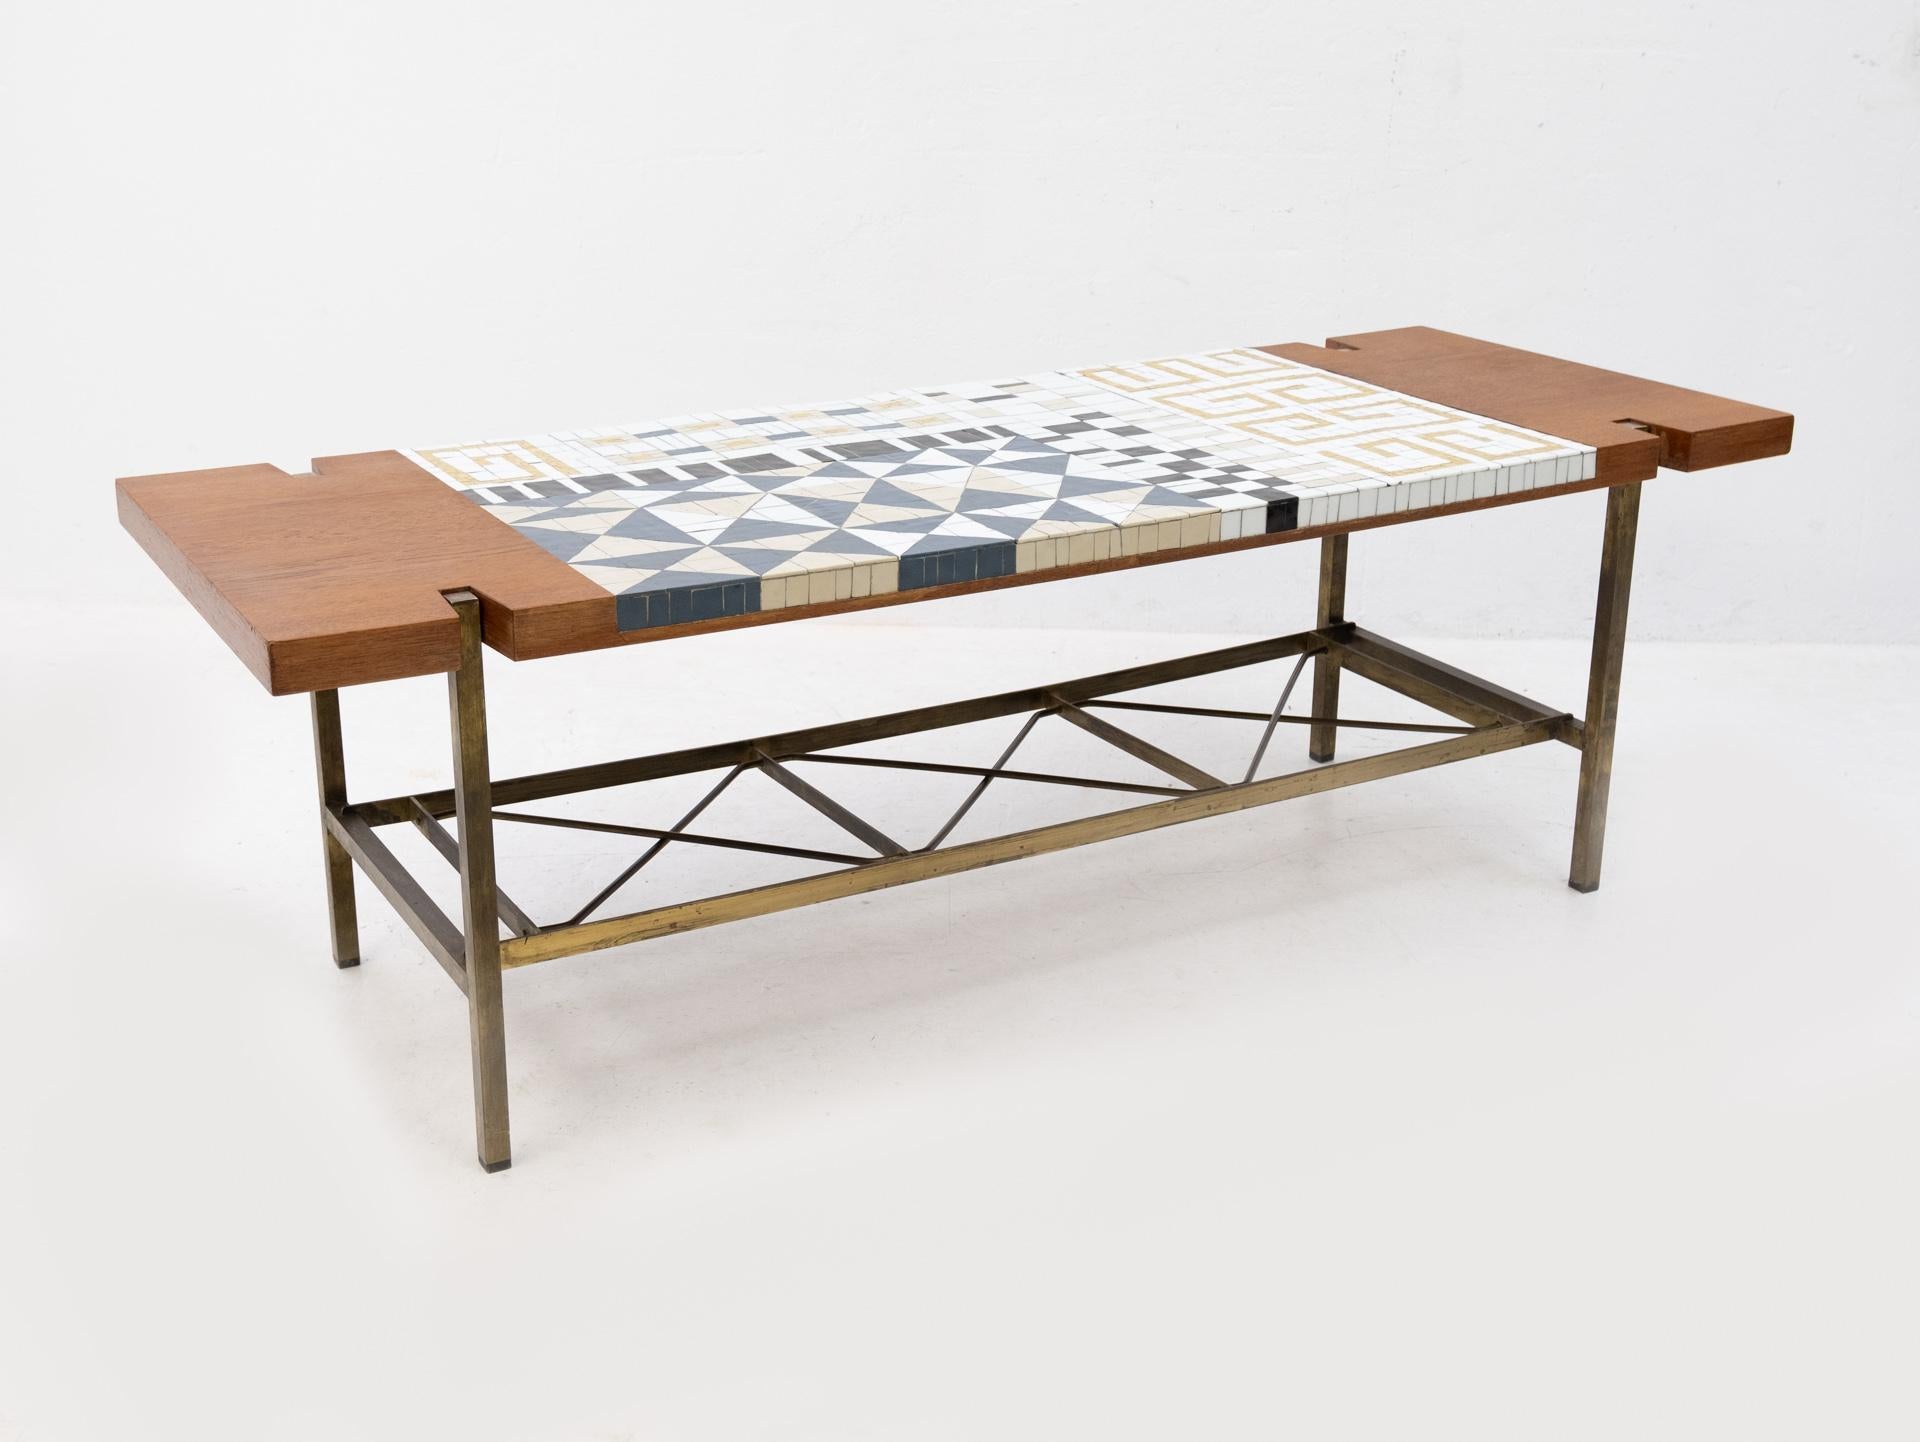 Mosaic Tile and Teak Coffee Table, 1950s 3